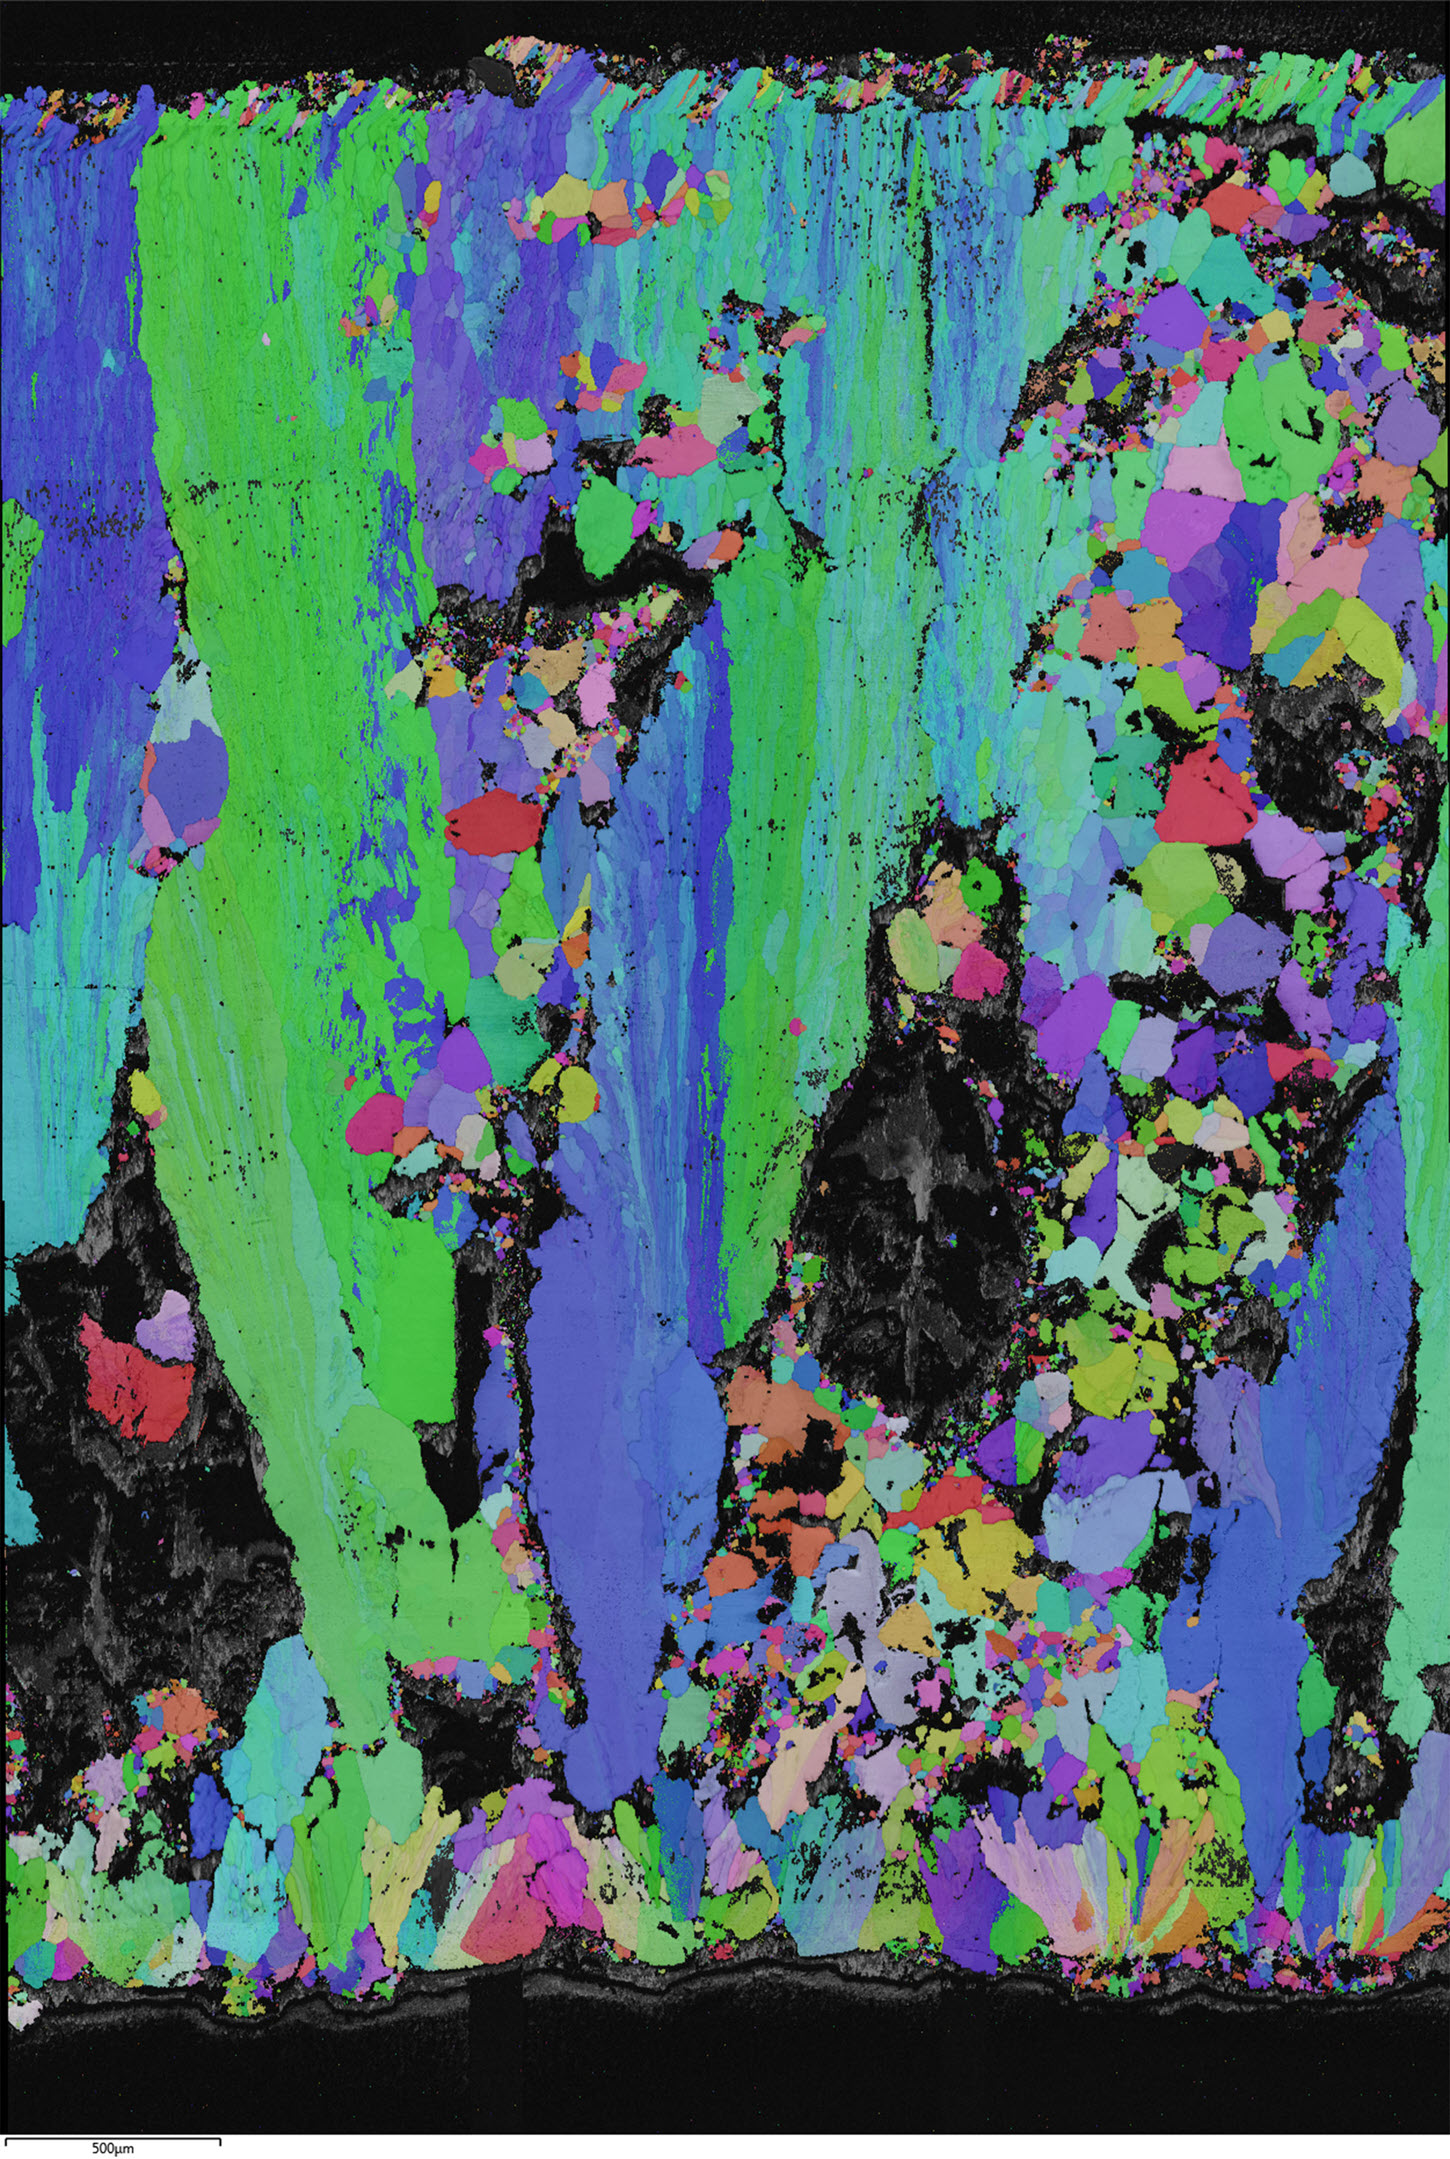 TITLE: Dinosaur eggshell; SUBJECT: Beautifully preserved crystallographic information of Cretaceous dinosaur eggshell detected by EBSD; CREDIT: Seung Choi, Institute of Vertebrate Paleontology and Paleoanthropology; METHOD/INSTRUMENT: JEOL JSM-7100F and its EBSD detector (Symmetry)